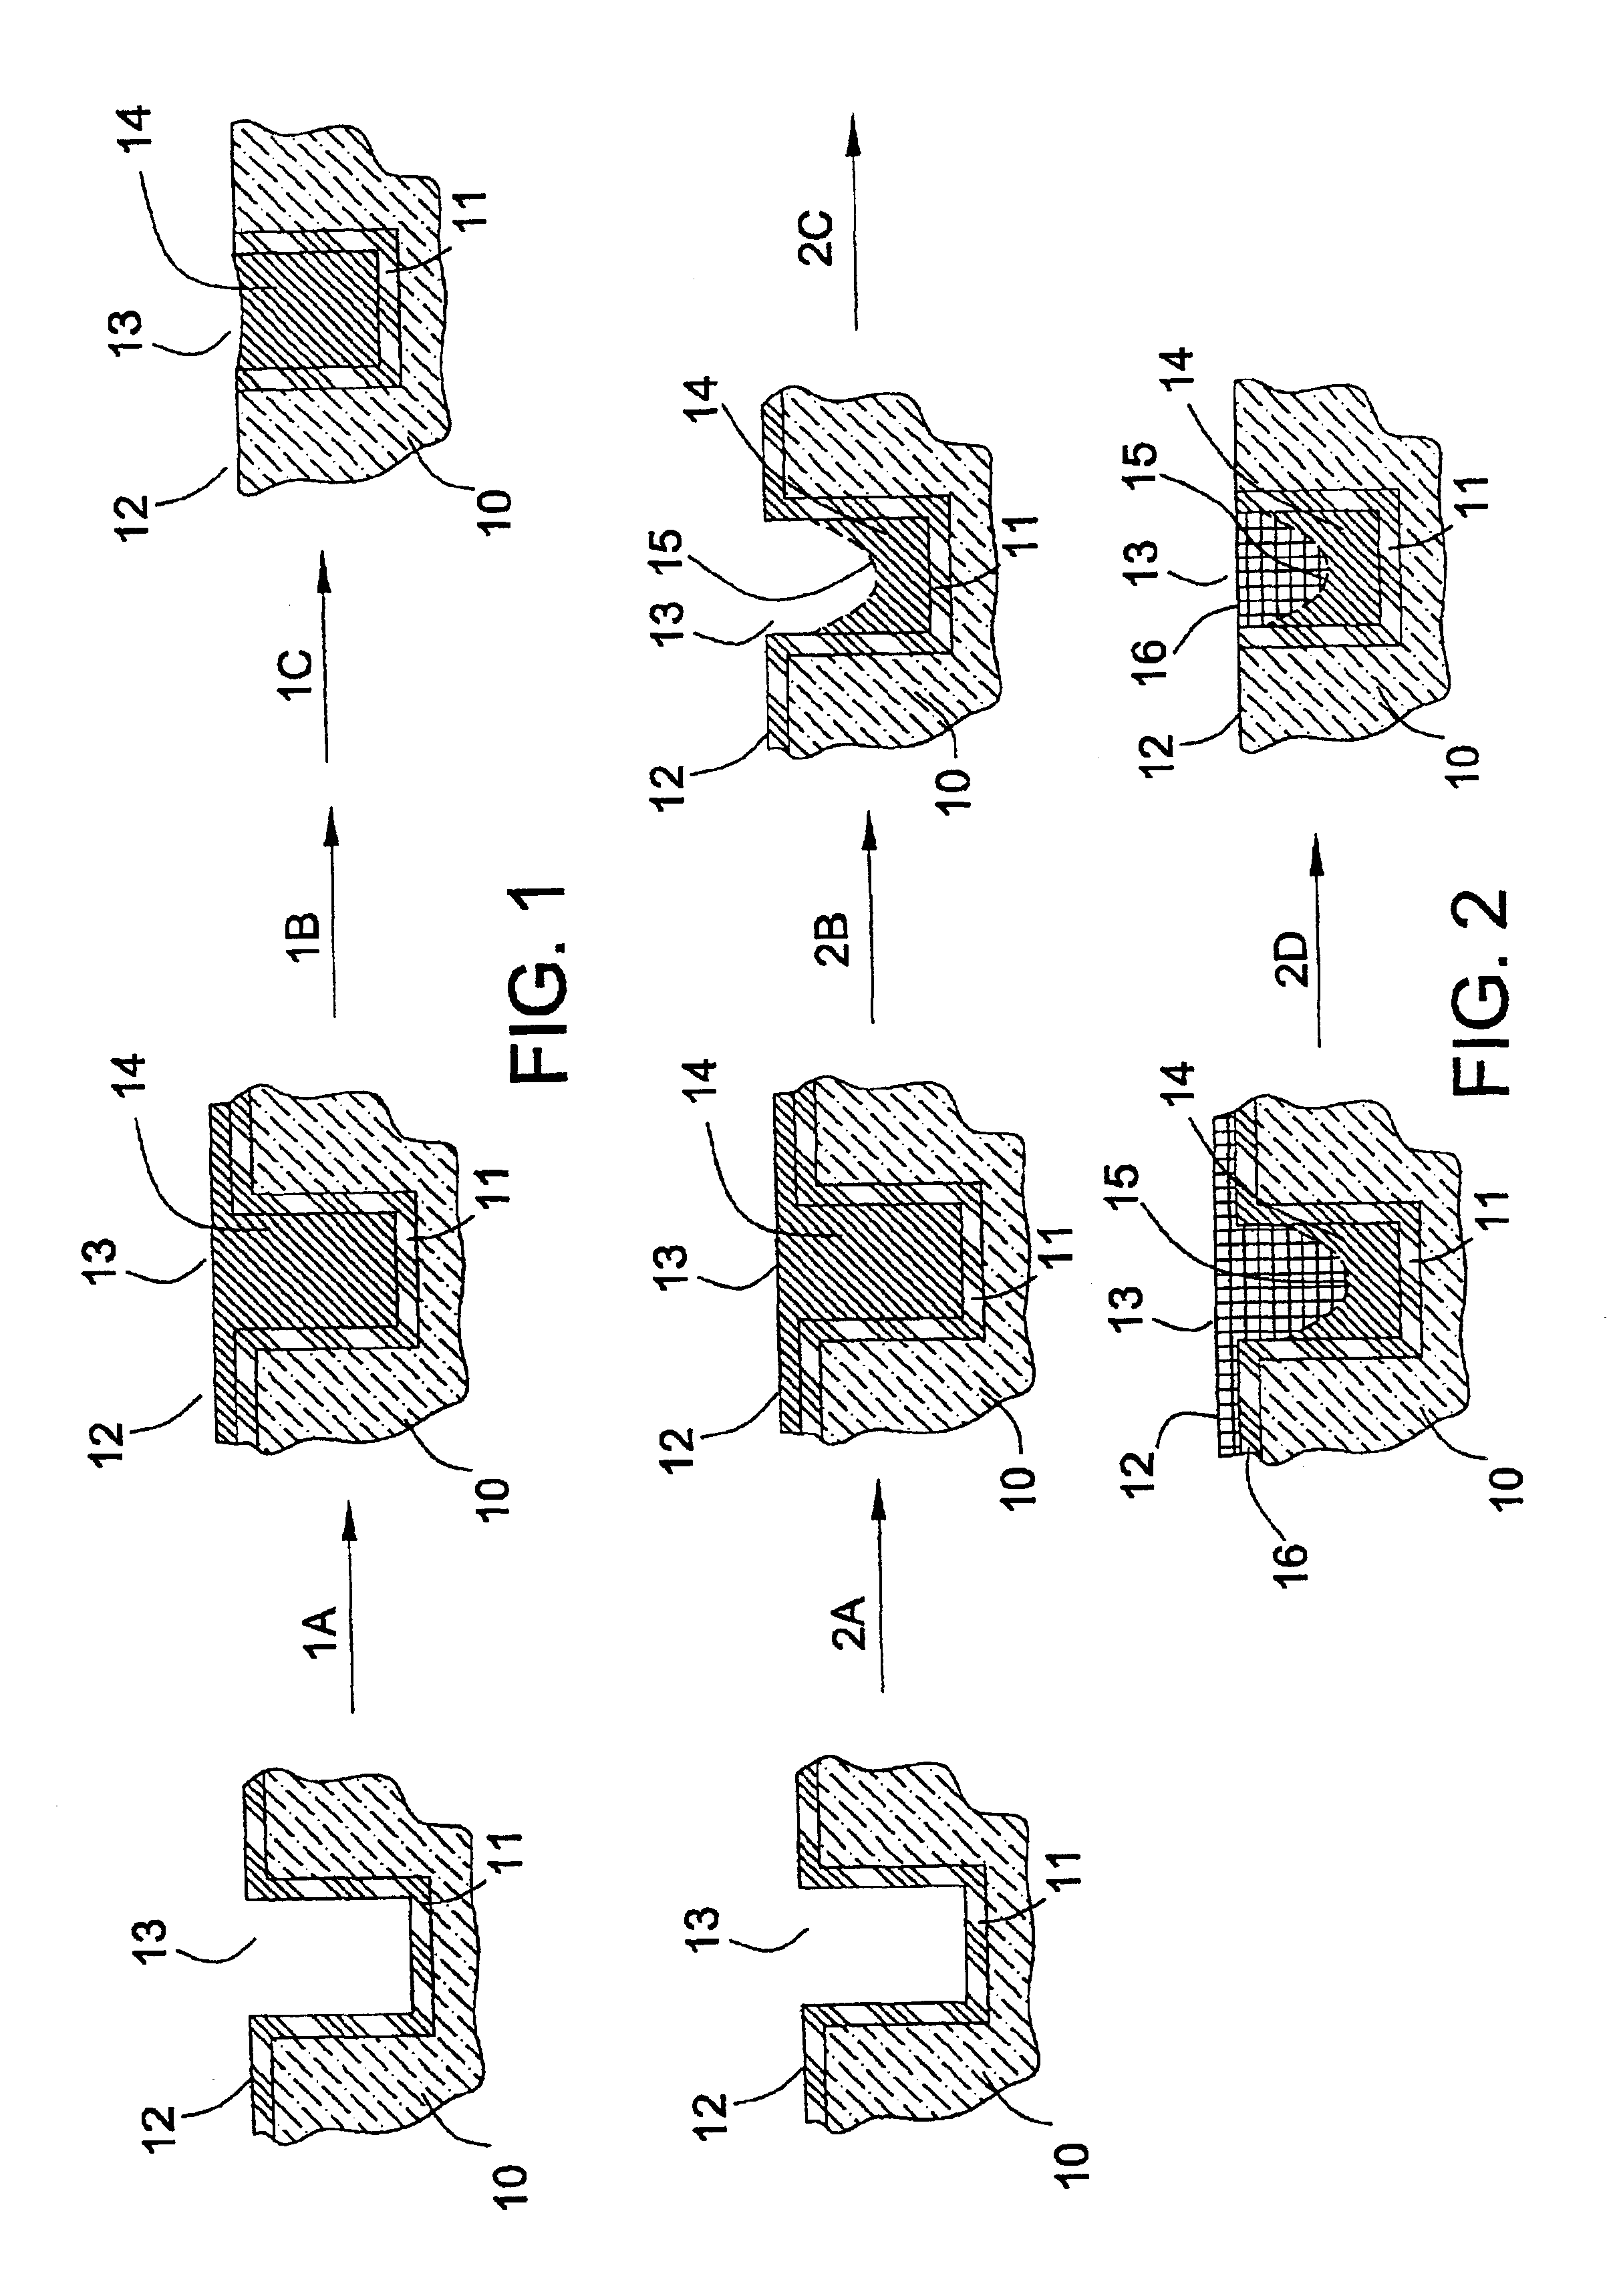 Method of reducing in-trench smearing during polishing